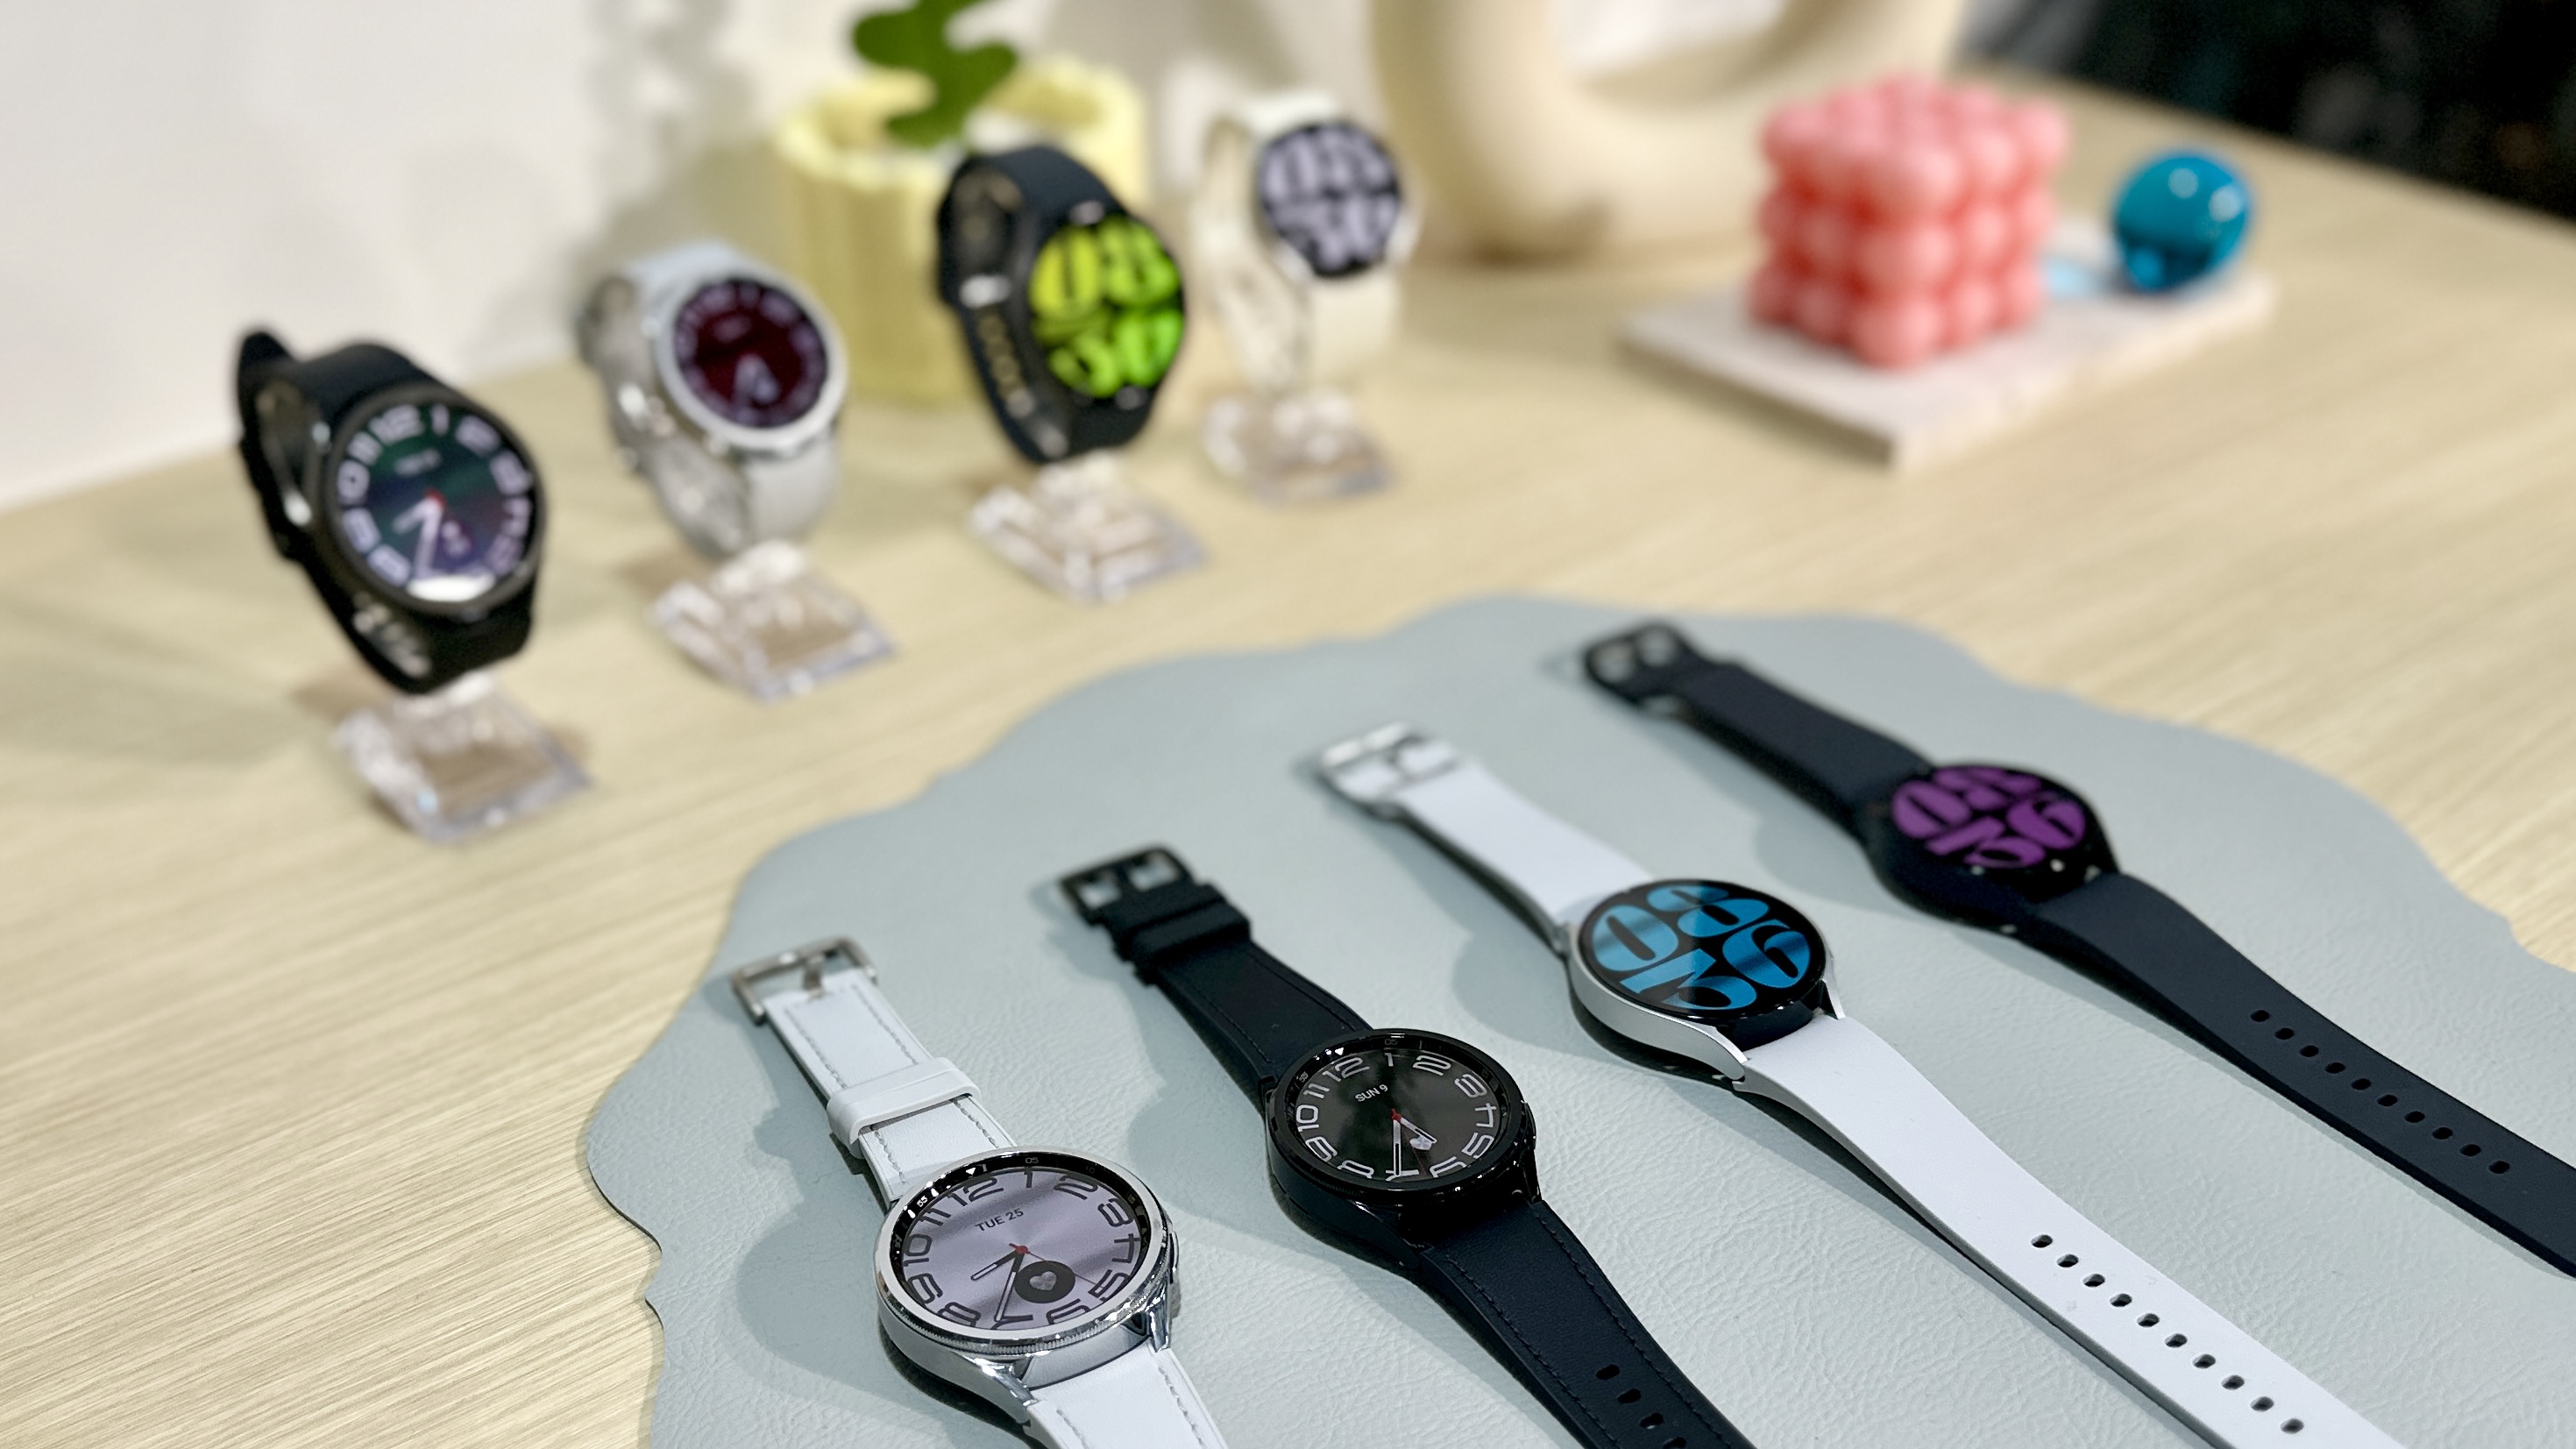 Galaxy Watch 6 devices on display